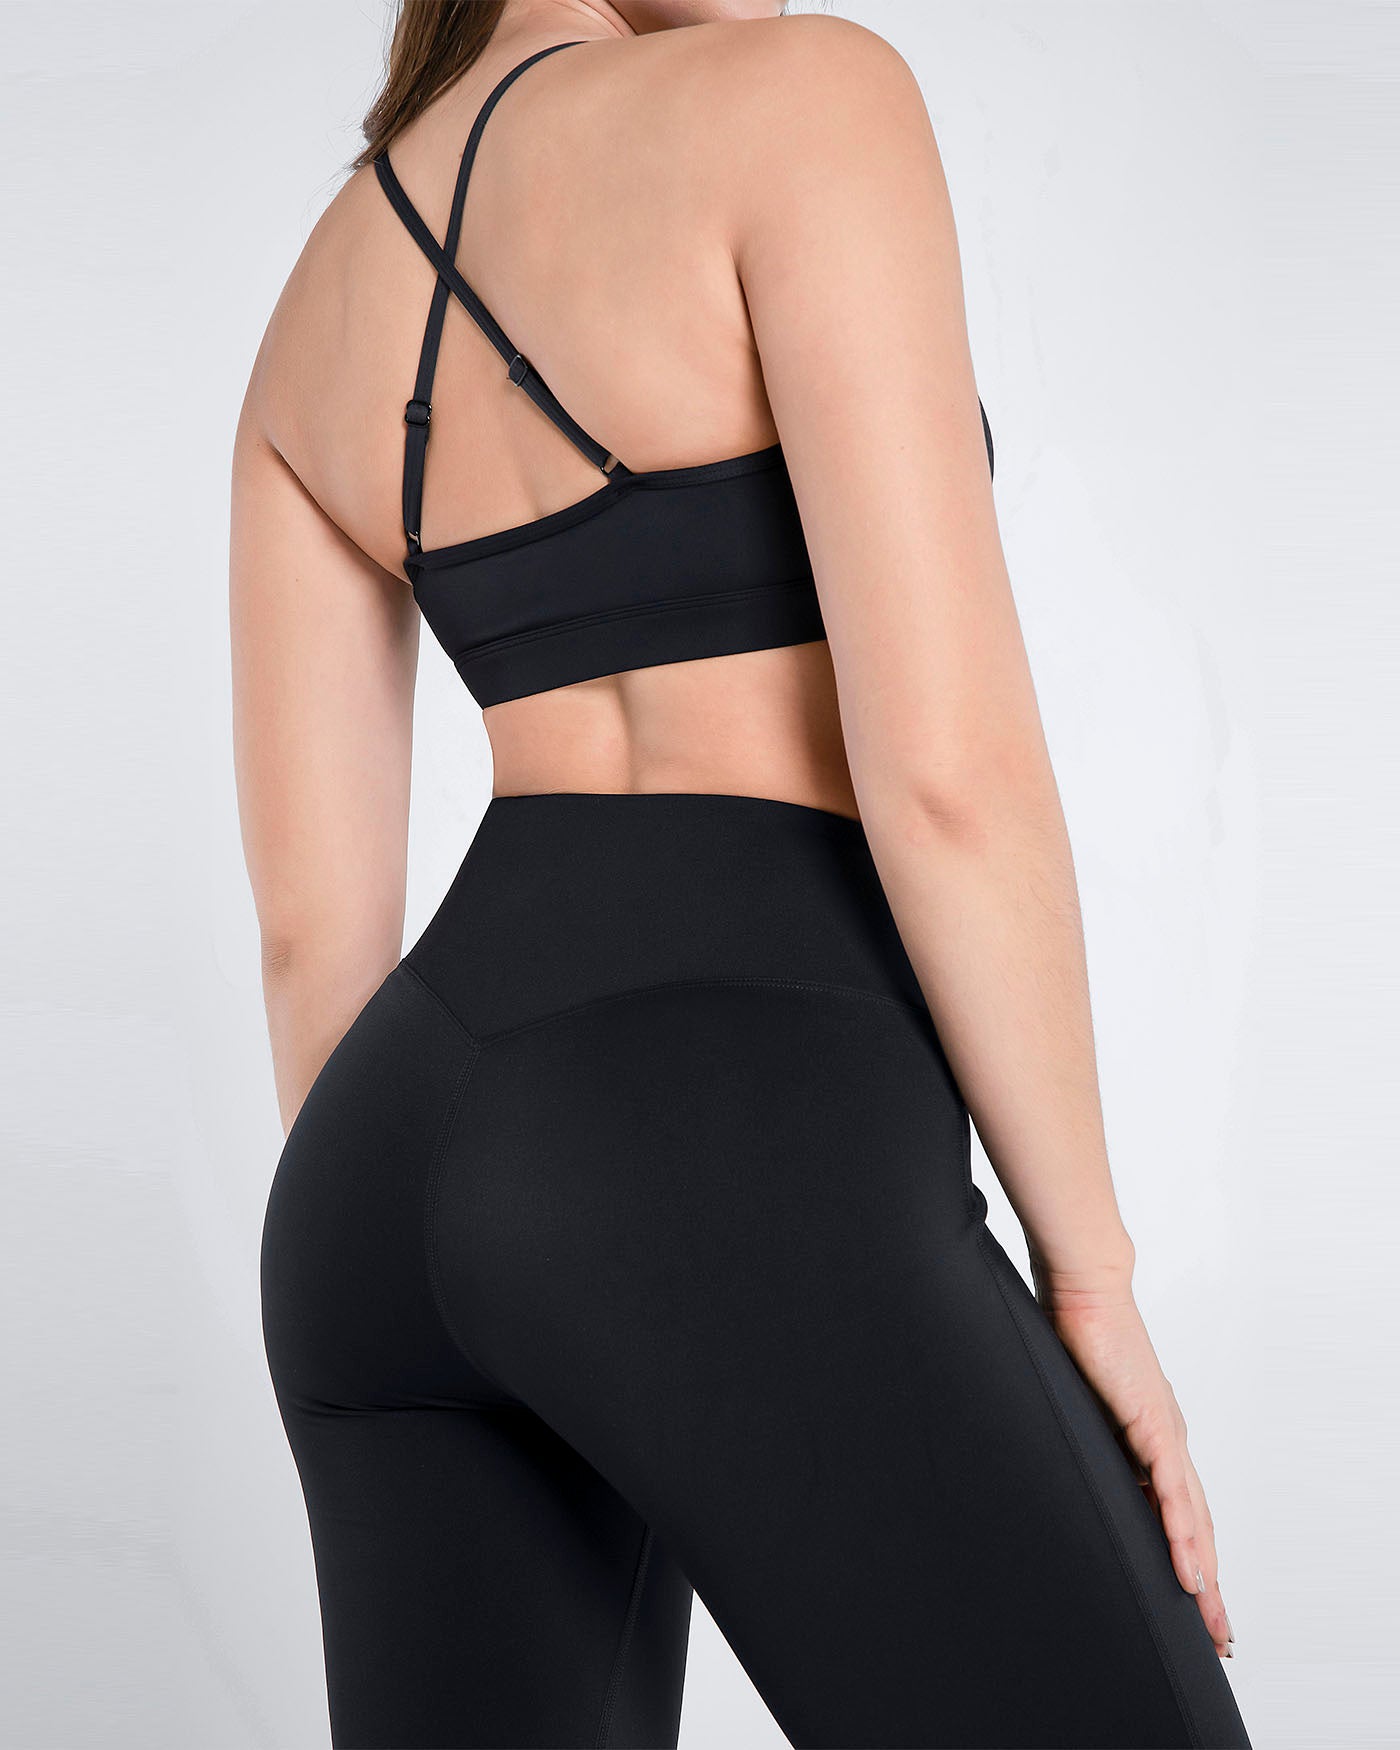 Free People Movement Your Corner Lose Control Bra and Leggings Set XS. B20  - $88 - From Nagwat